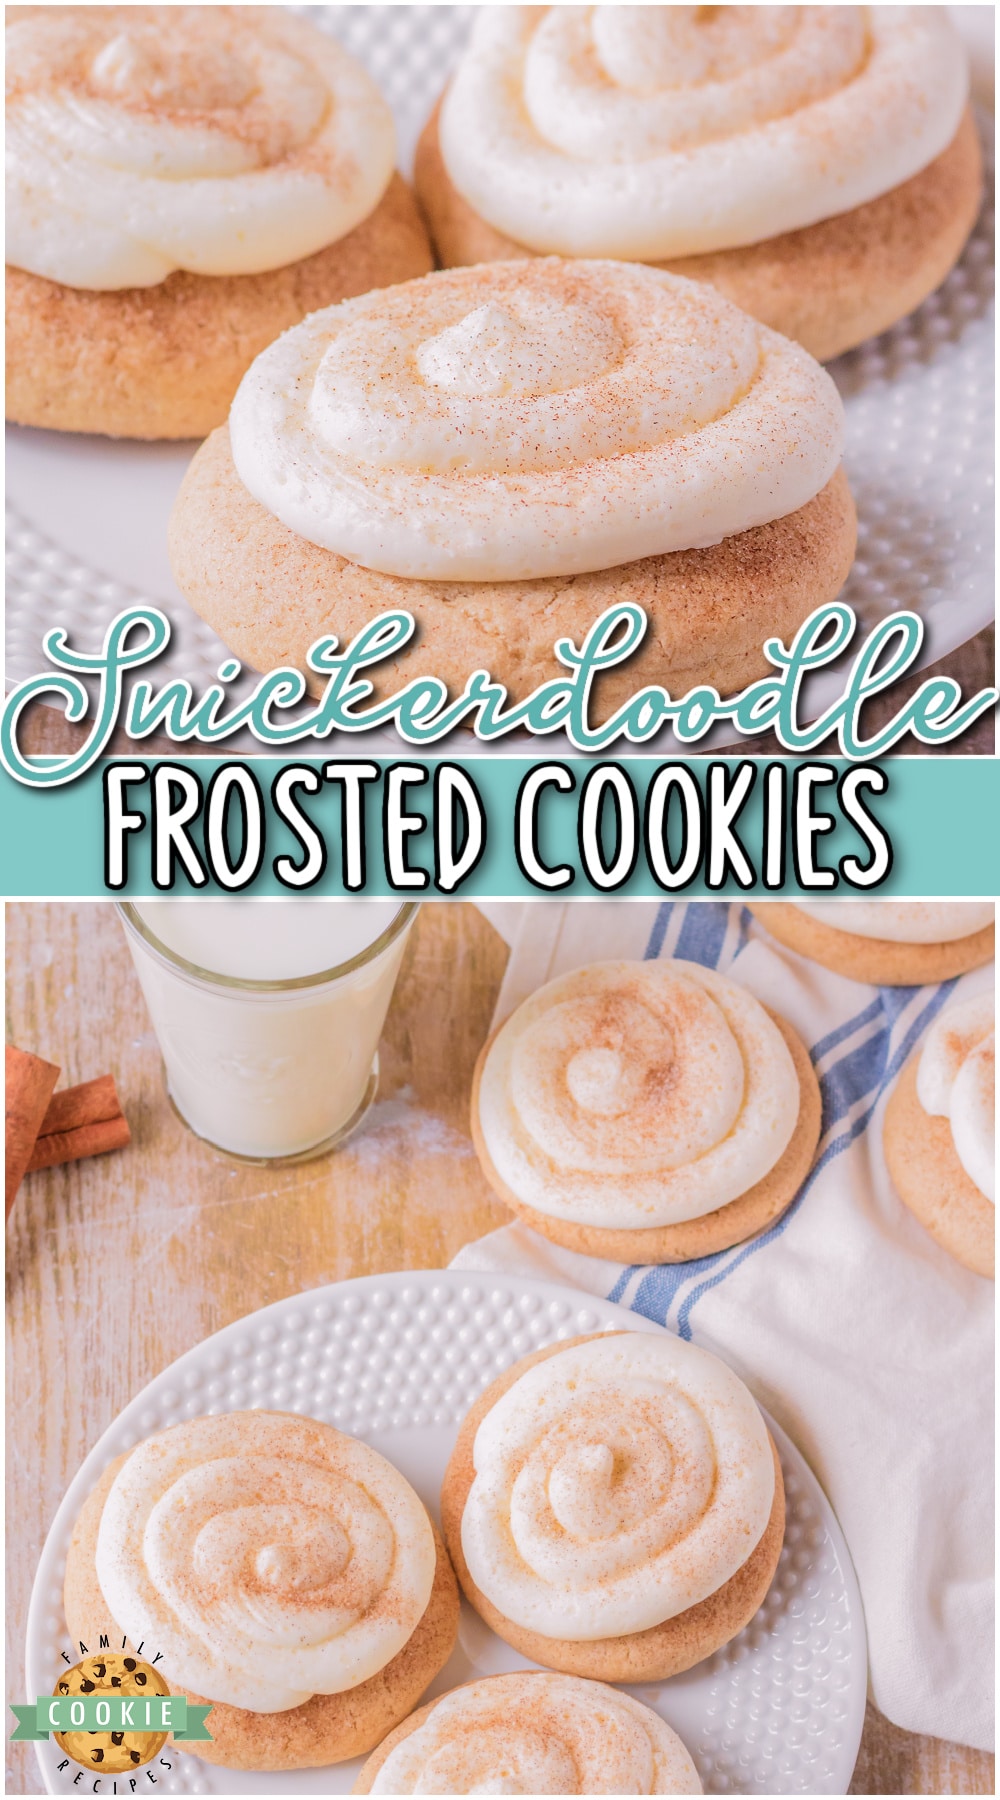 Frosted Snickerdoodles are a soft, chewy cookie rolled in cinnamon and sugar topped with homemade Buttercream Frosting. This snickerdoodle cookie with frosting is the perfect homemade cookie that tastes gourmet! via @buttergirls